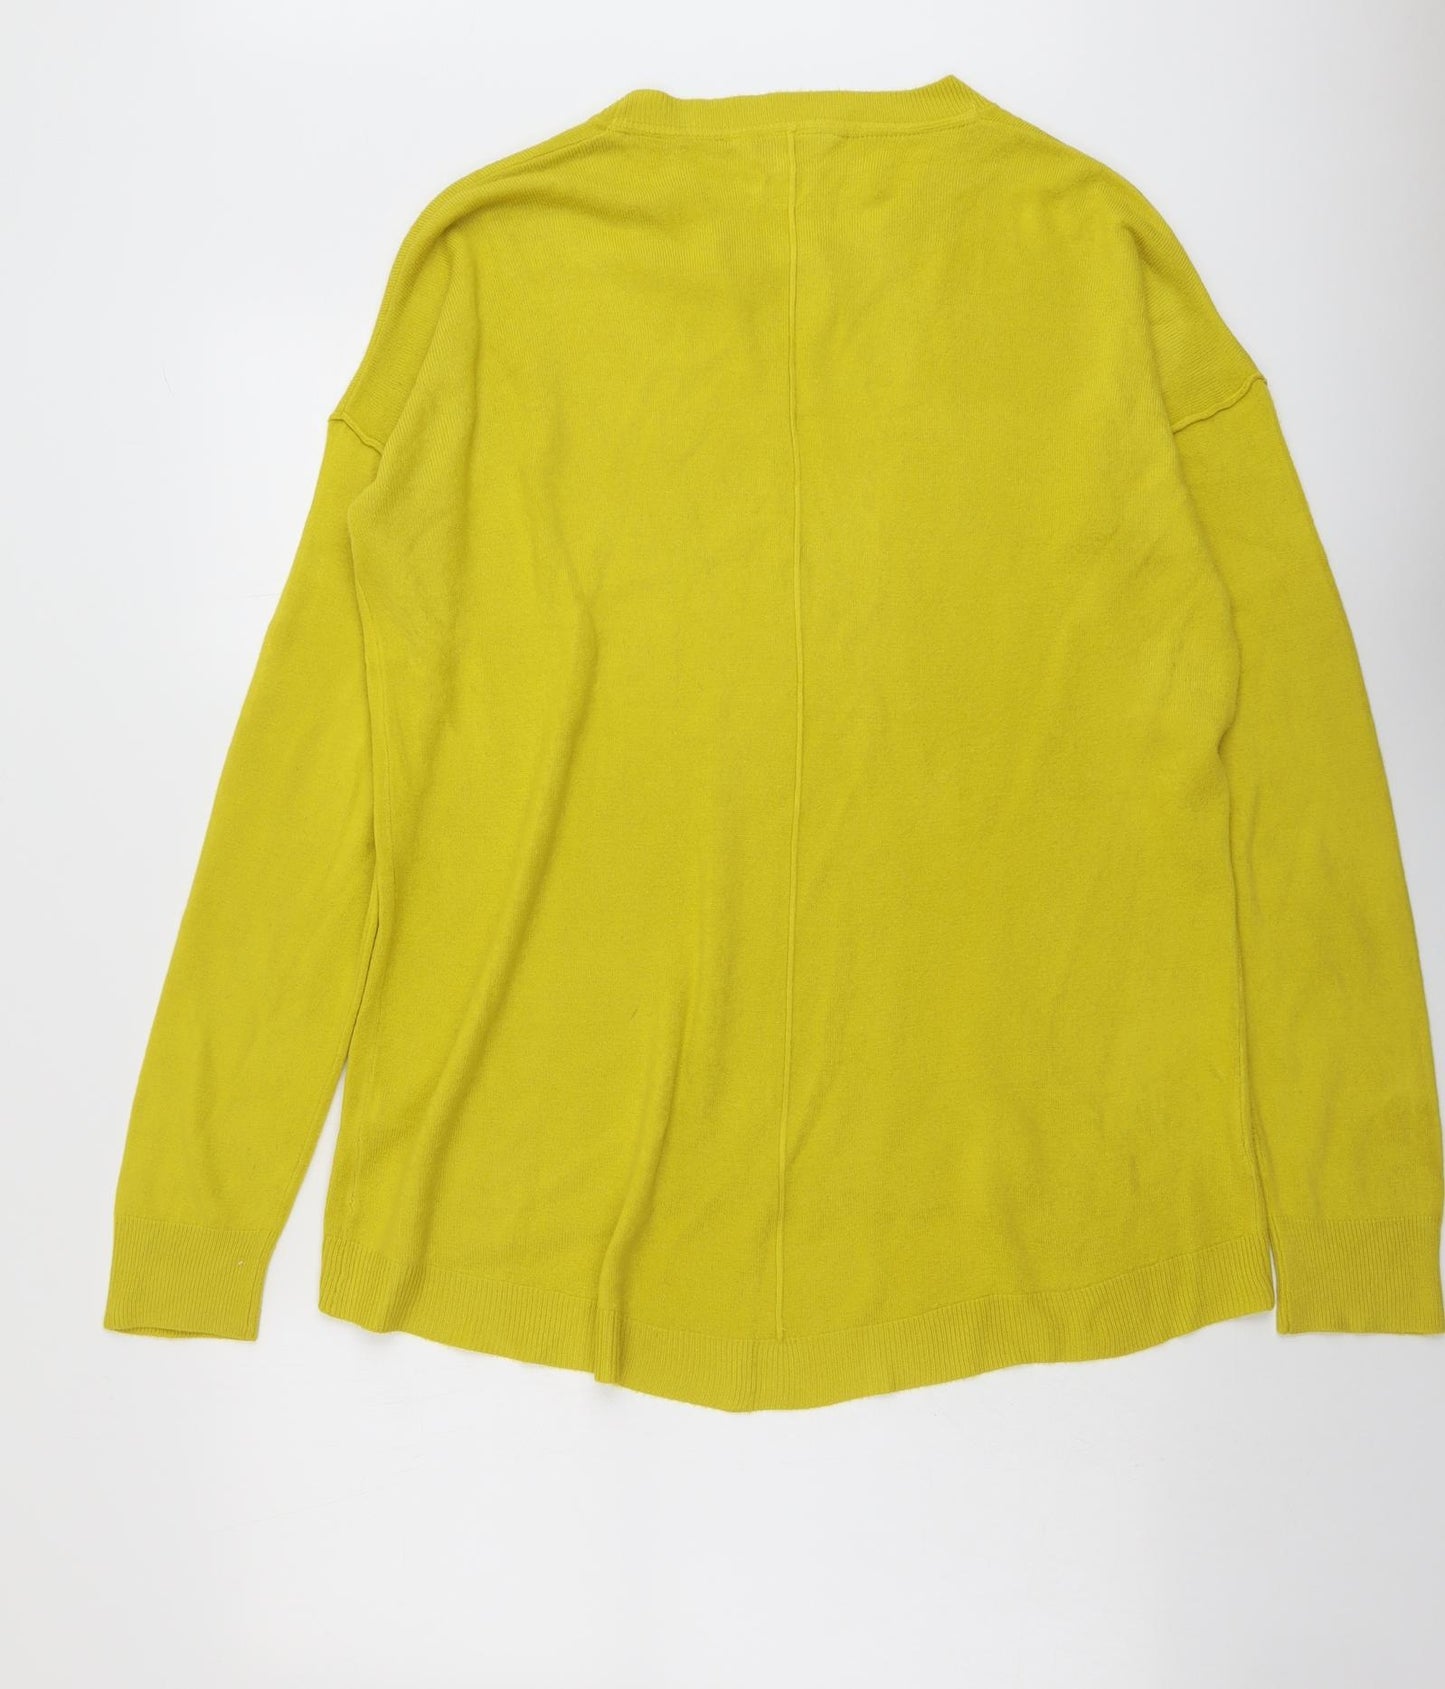 Principles Womens Yellow Round Neck Acrylic Pullover Jumper Size 14